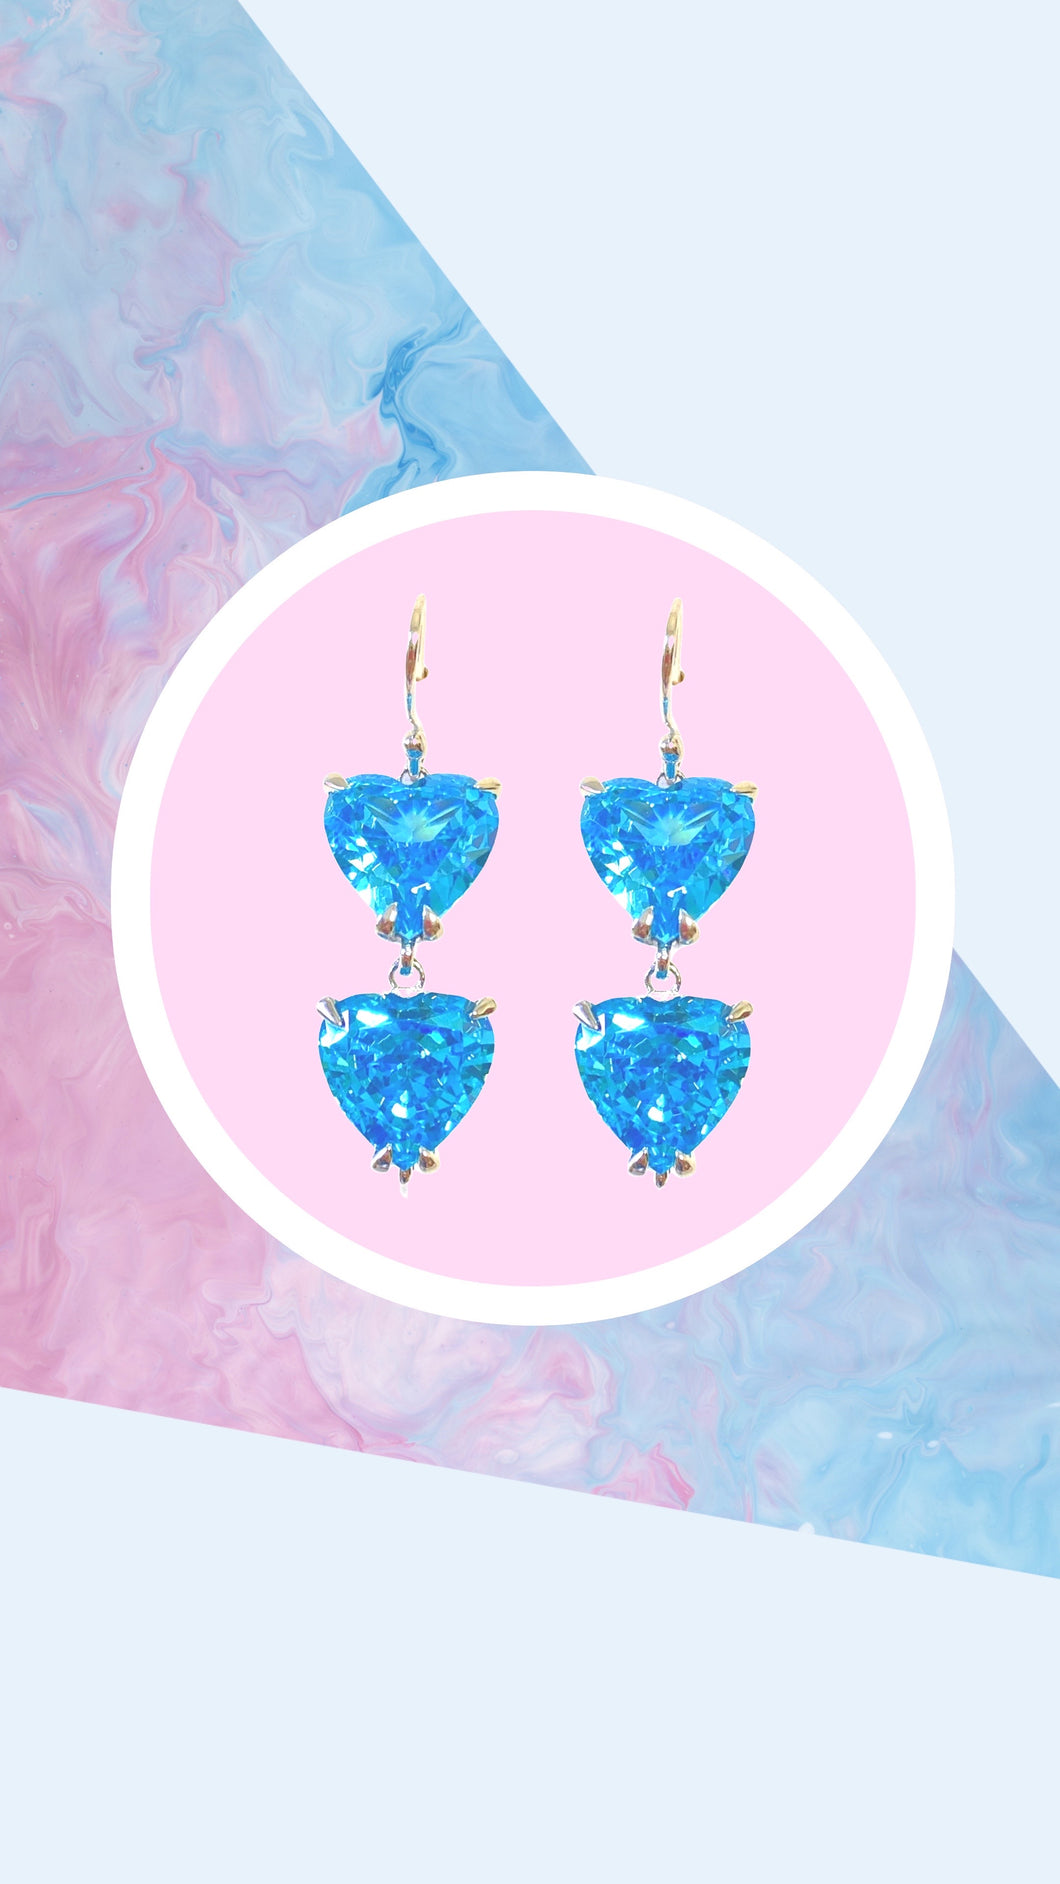 Crystal Heart Drop Earrings with Lab-grown gemstones and Sterling Silver - Aqua Blue